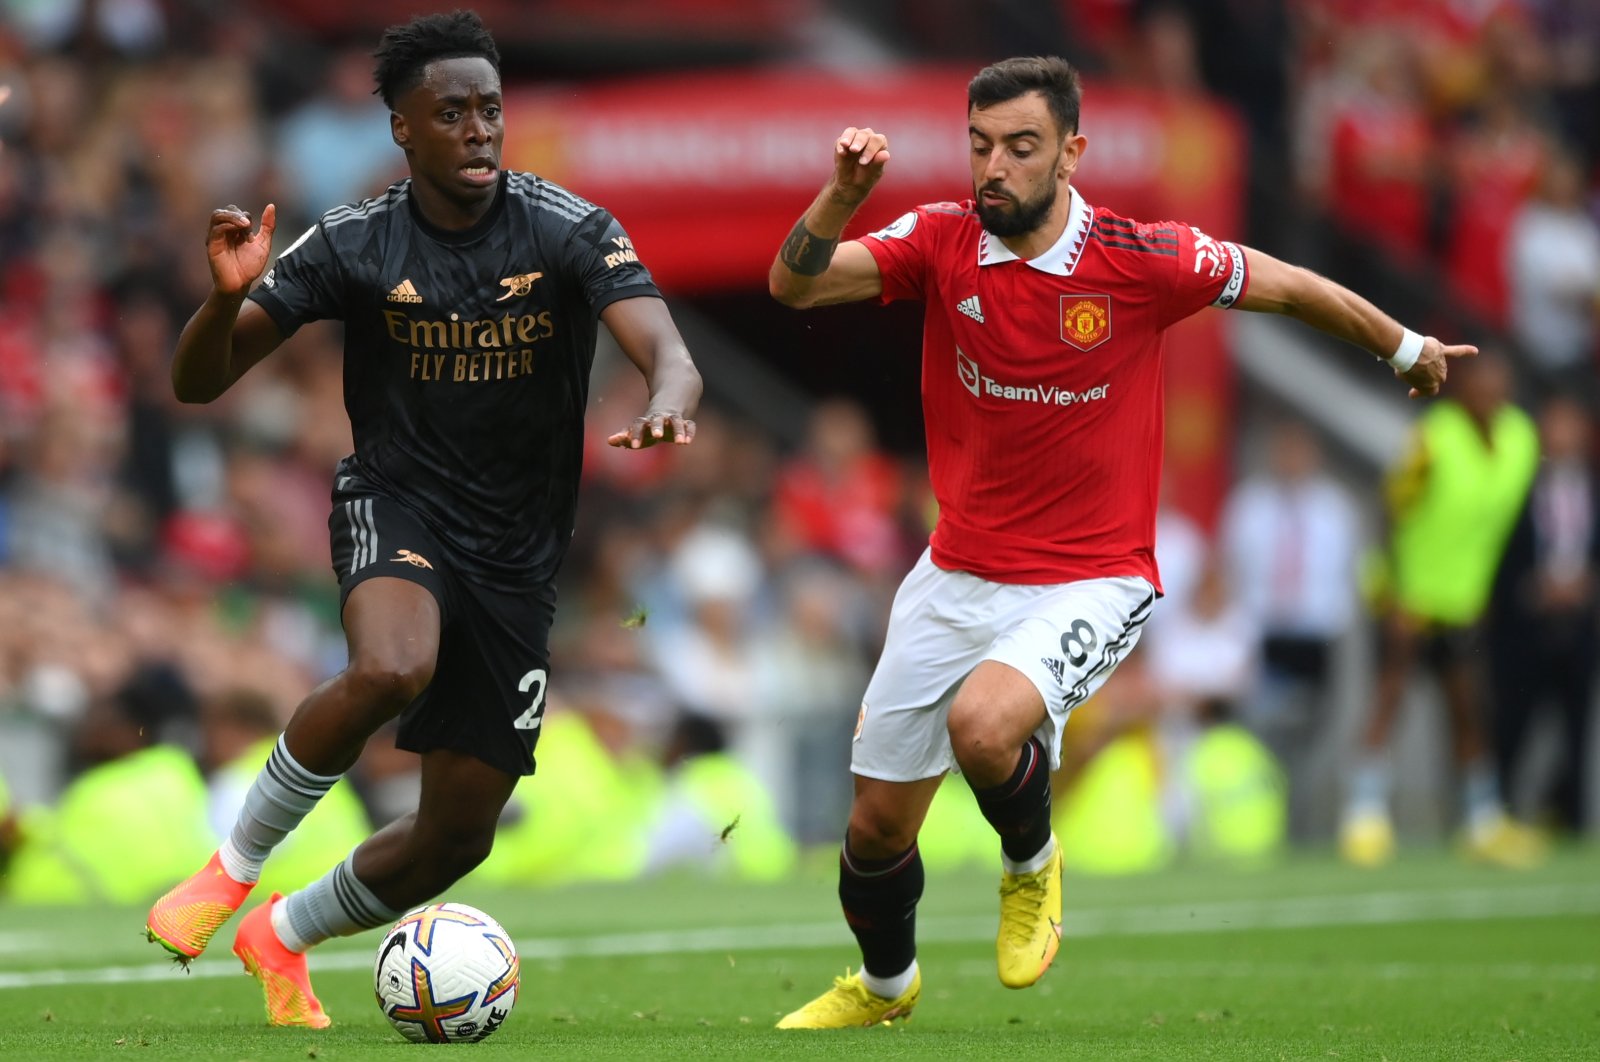 Arsenal&#039;s Albert Sambi Lokonga runs with the ball while under pressure from Manchester United&#039;s Bruno Fernandes during the Premier League match between Manchester United and Arsenal FC at Old Trafford, Manchester, England, Sept. 4, 2022. (Getty Images Photo)